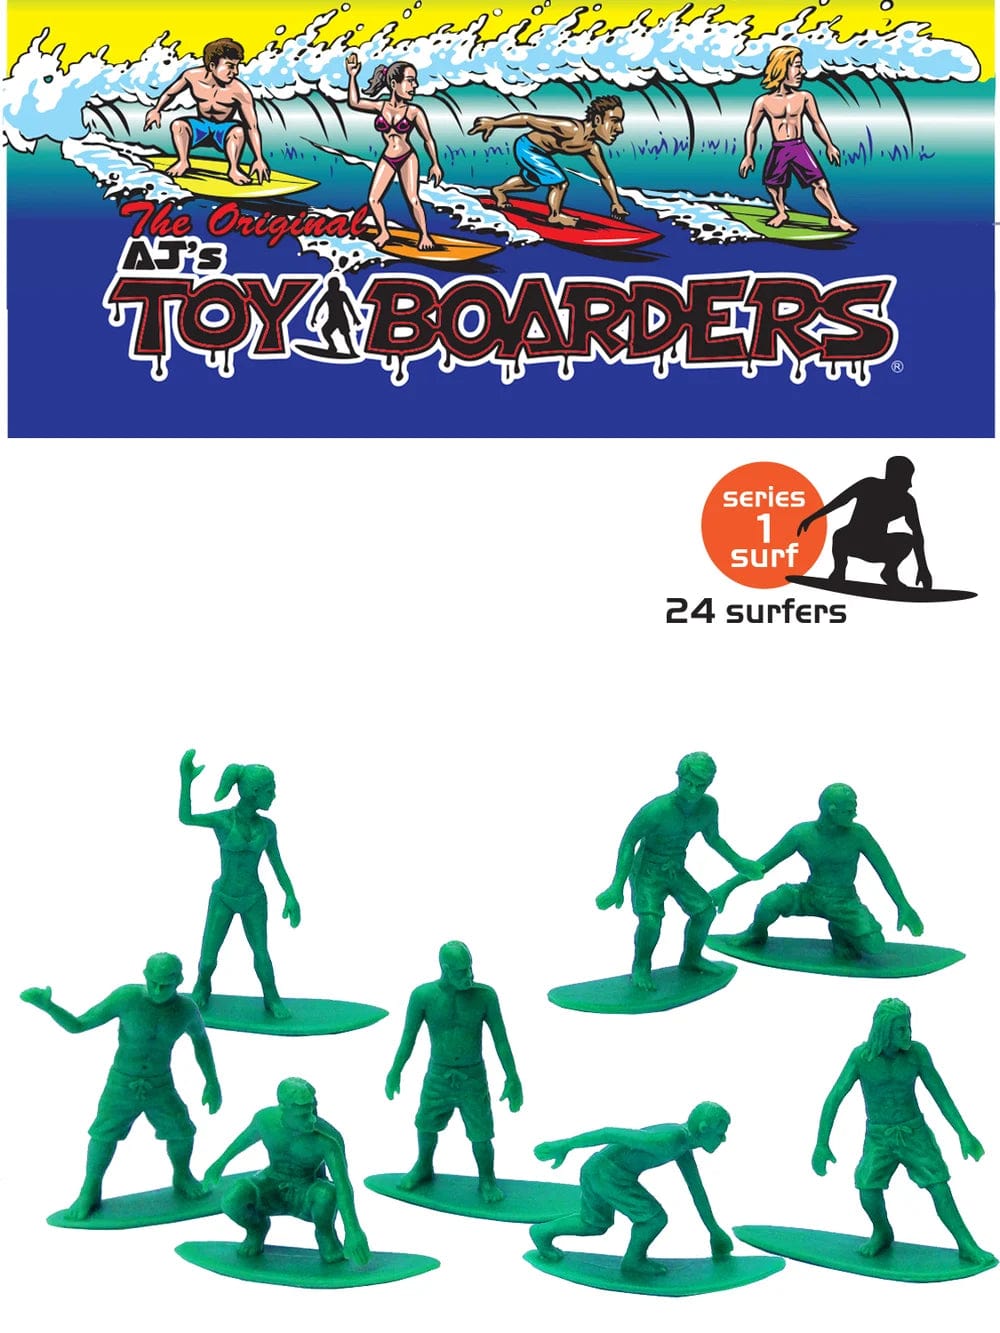 Toy Boarders Surf Series #1